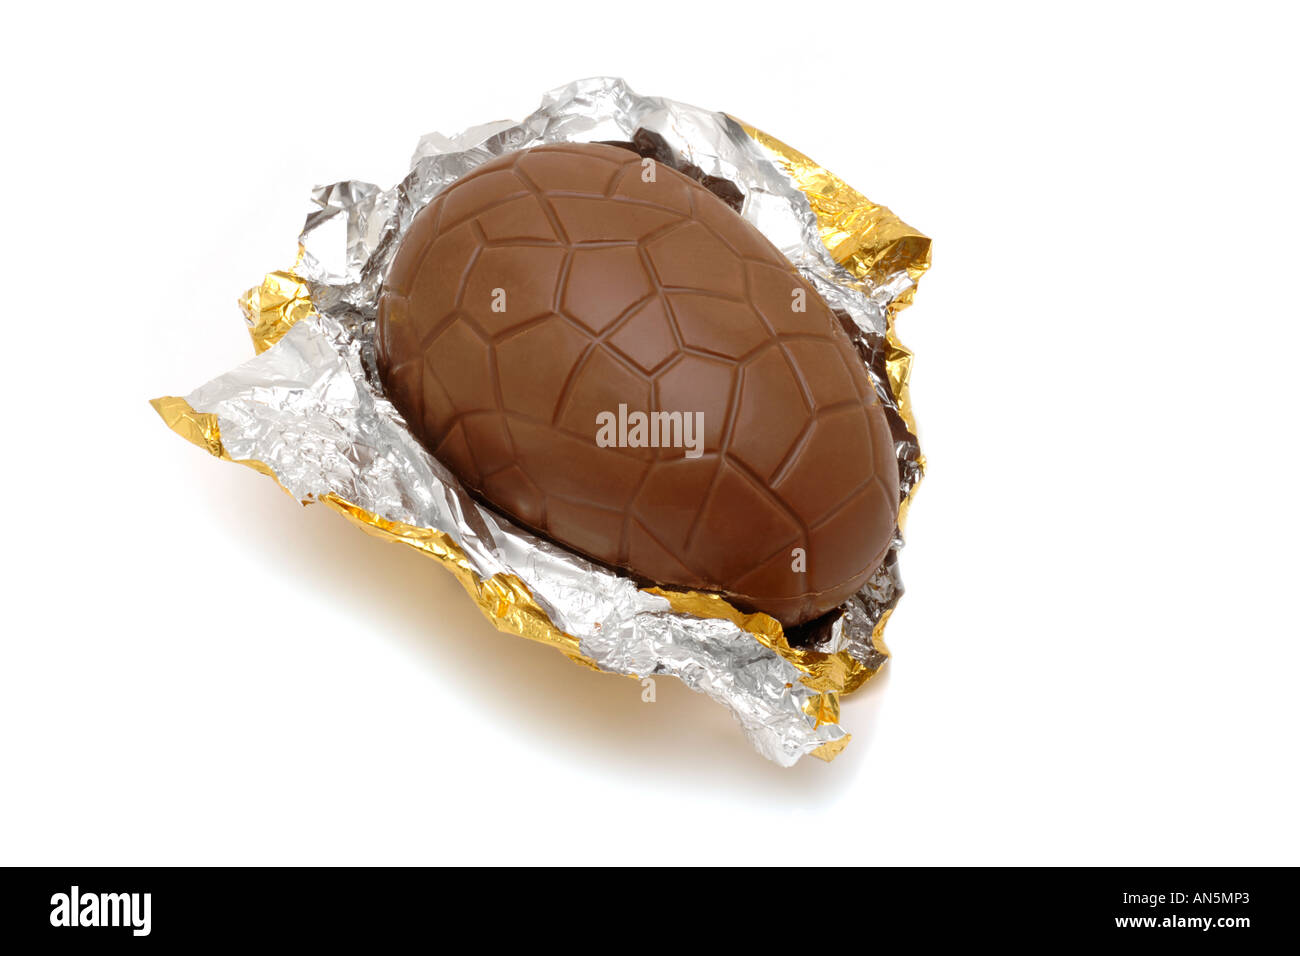 Milk chocolate easter egg in gold foil on white background Stock Photo